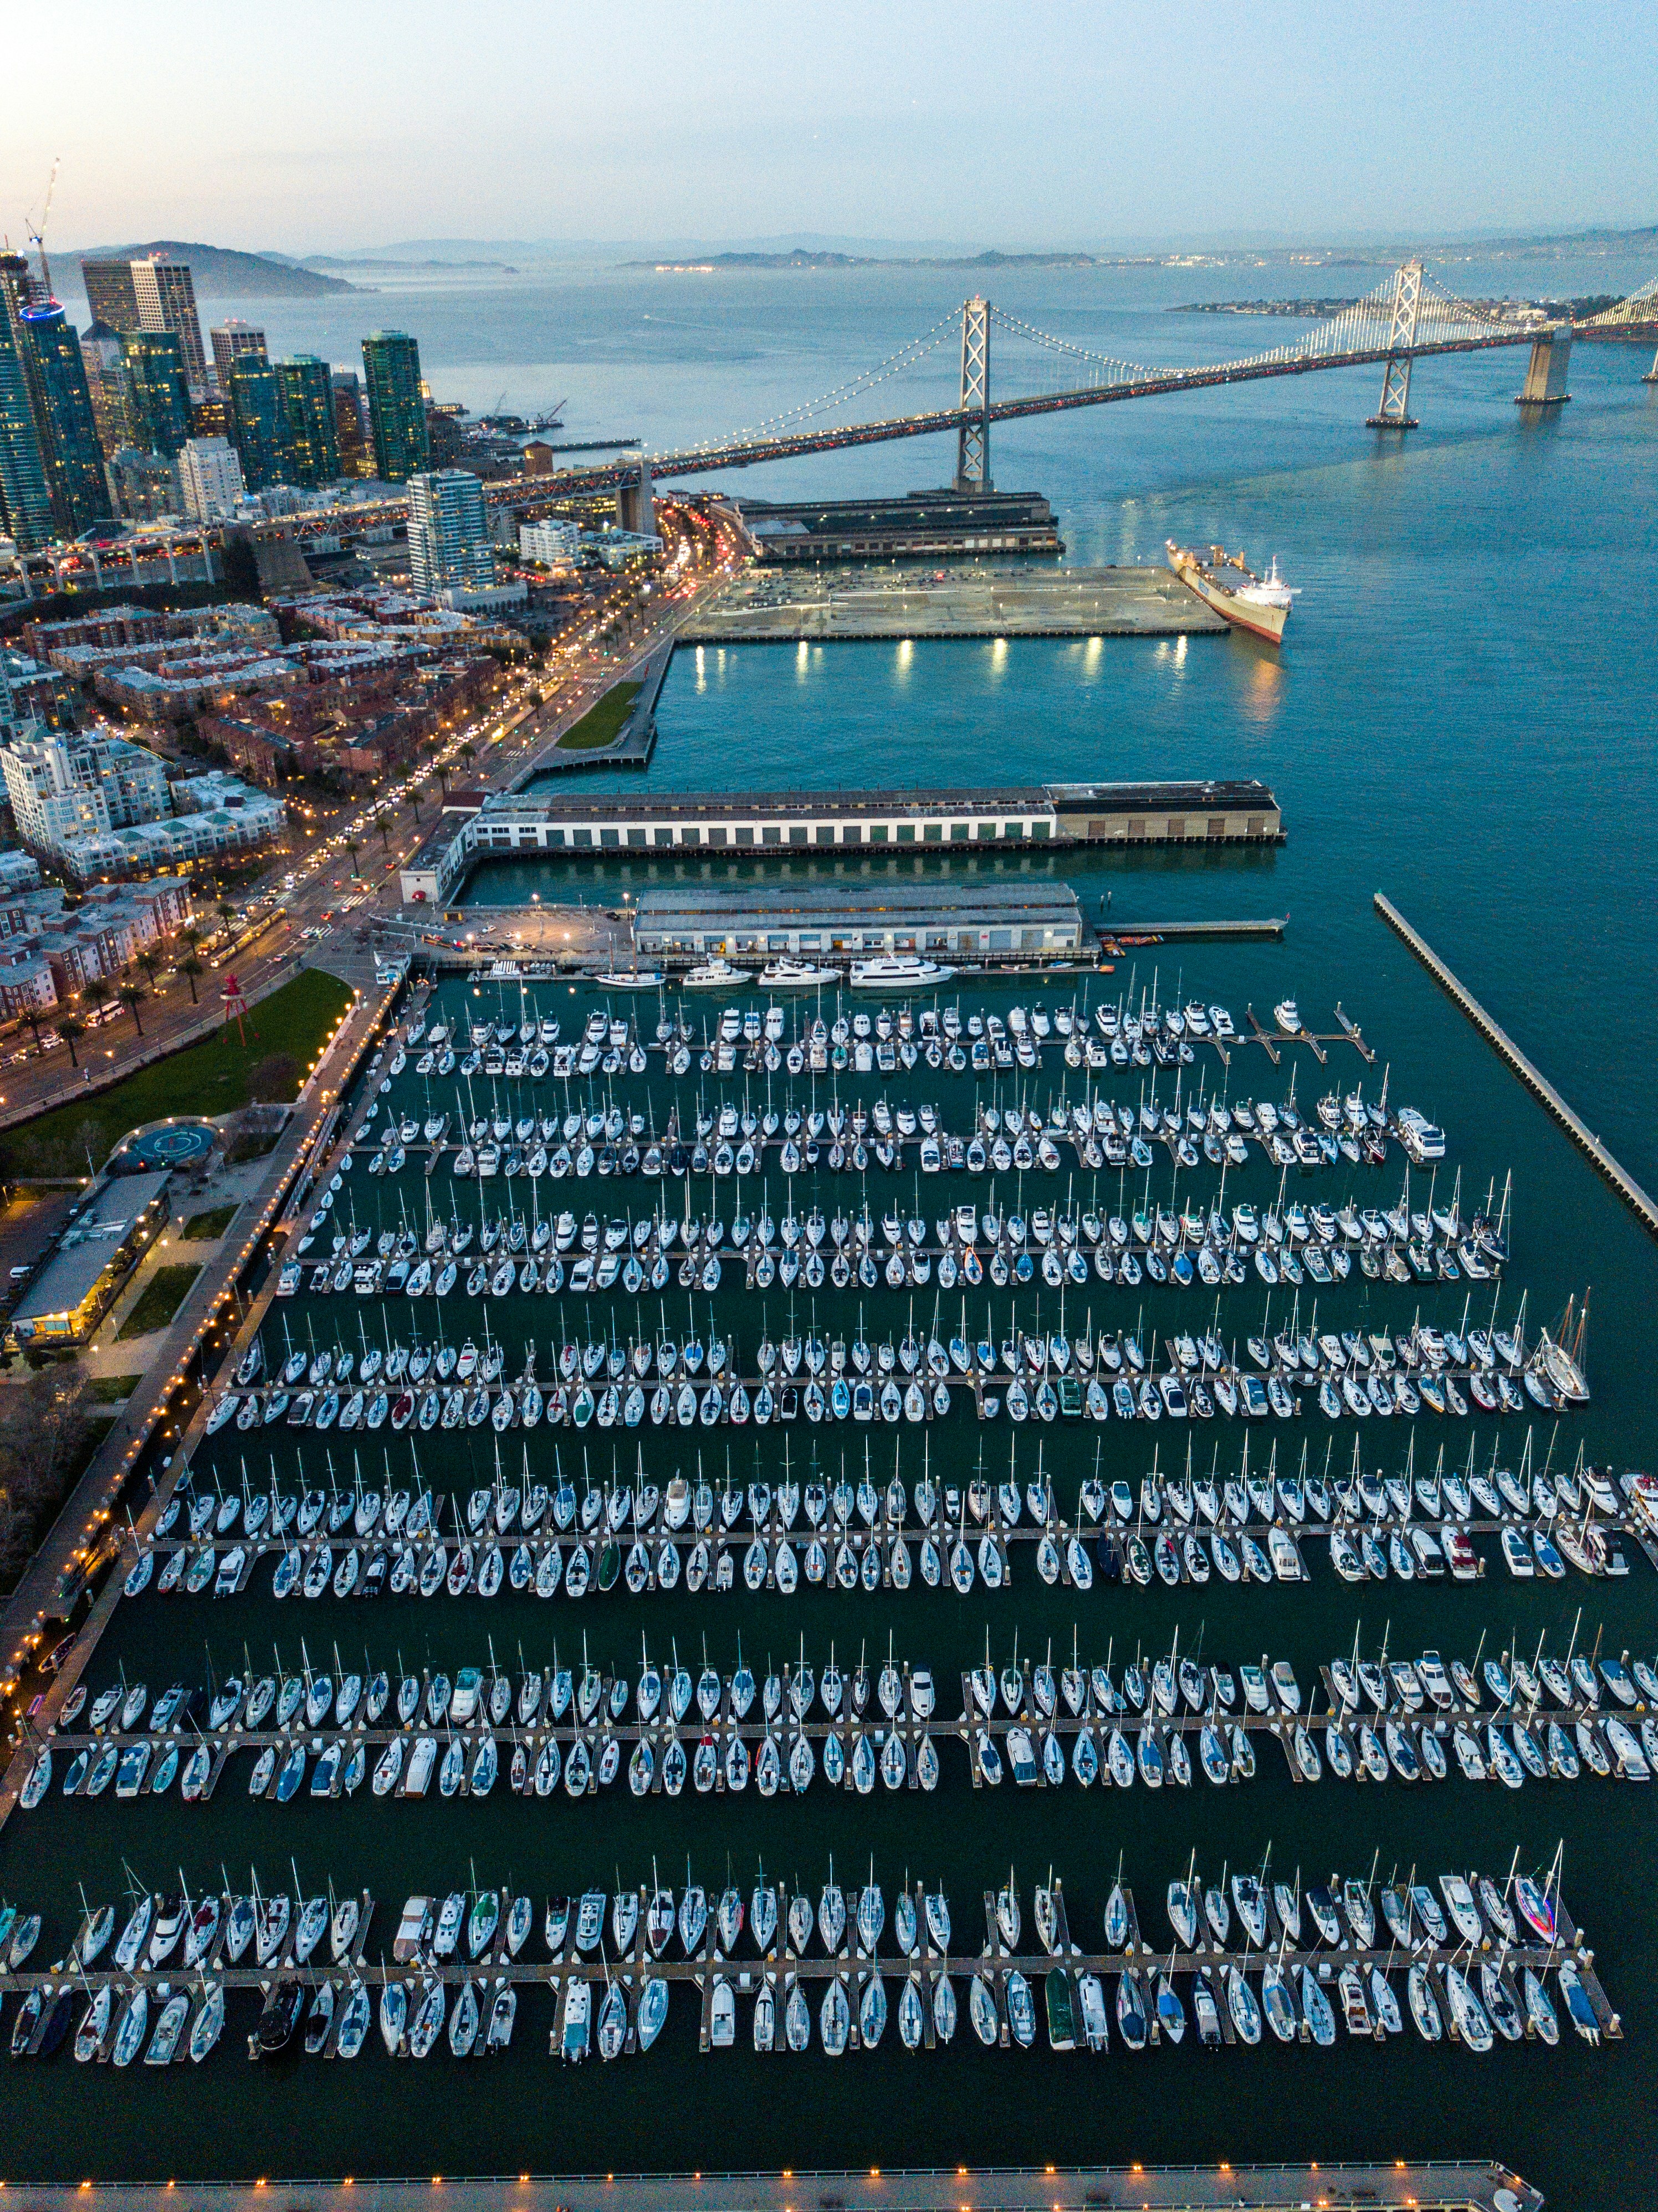 Sail boats parked near the Bay Bridge in San Francisco. Taken with a DJI mavic when i was visiting a couple of months ago.